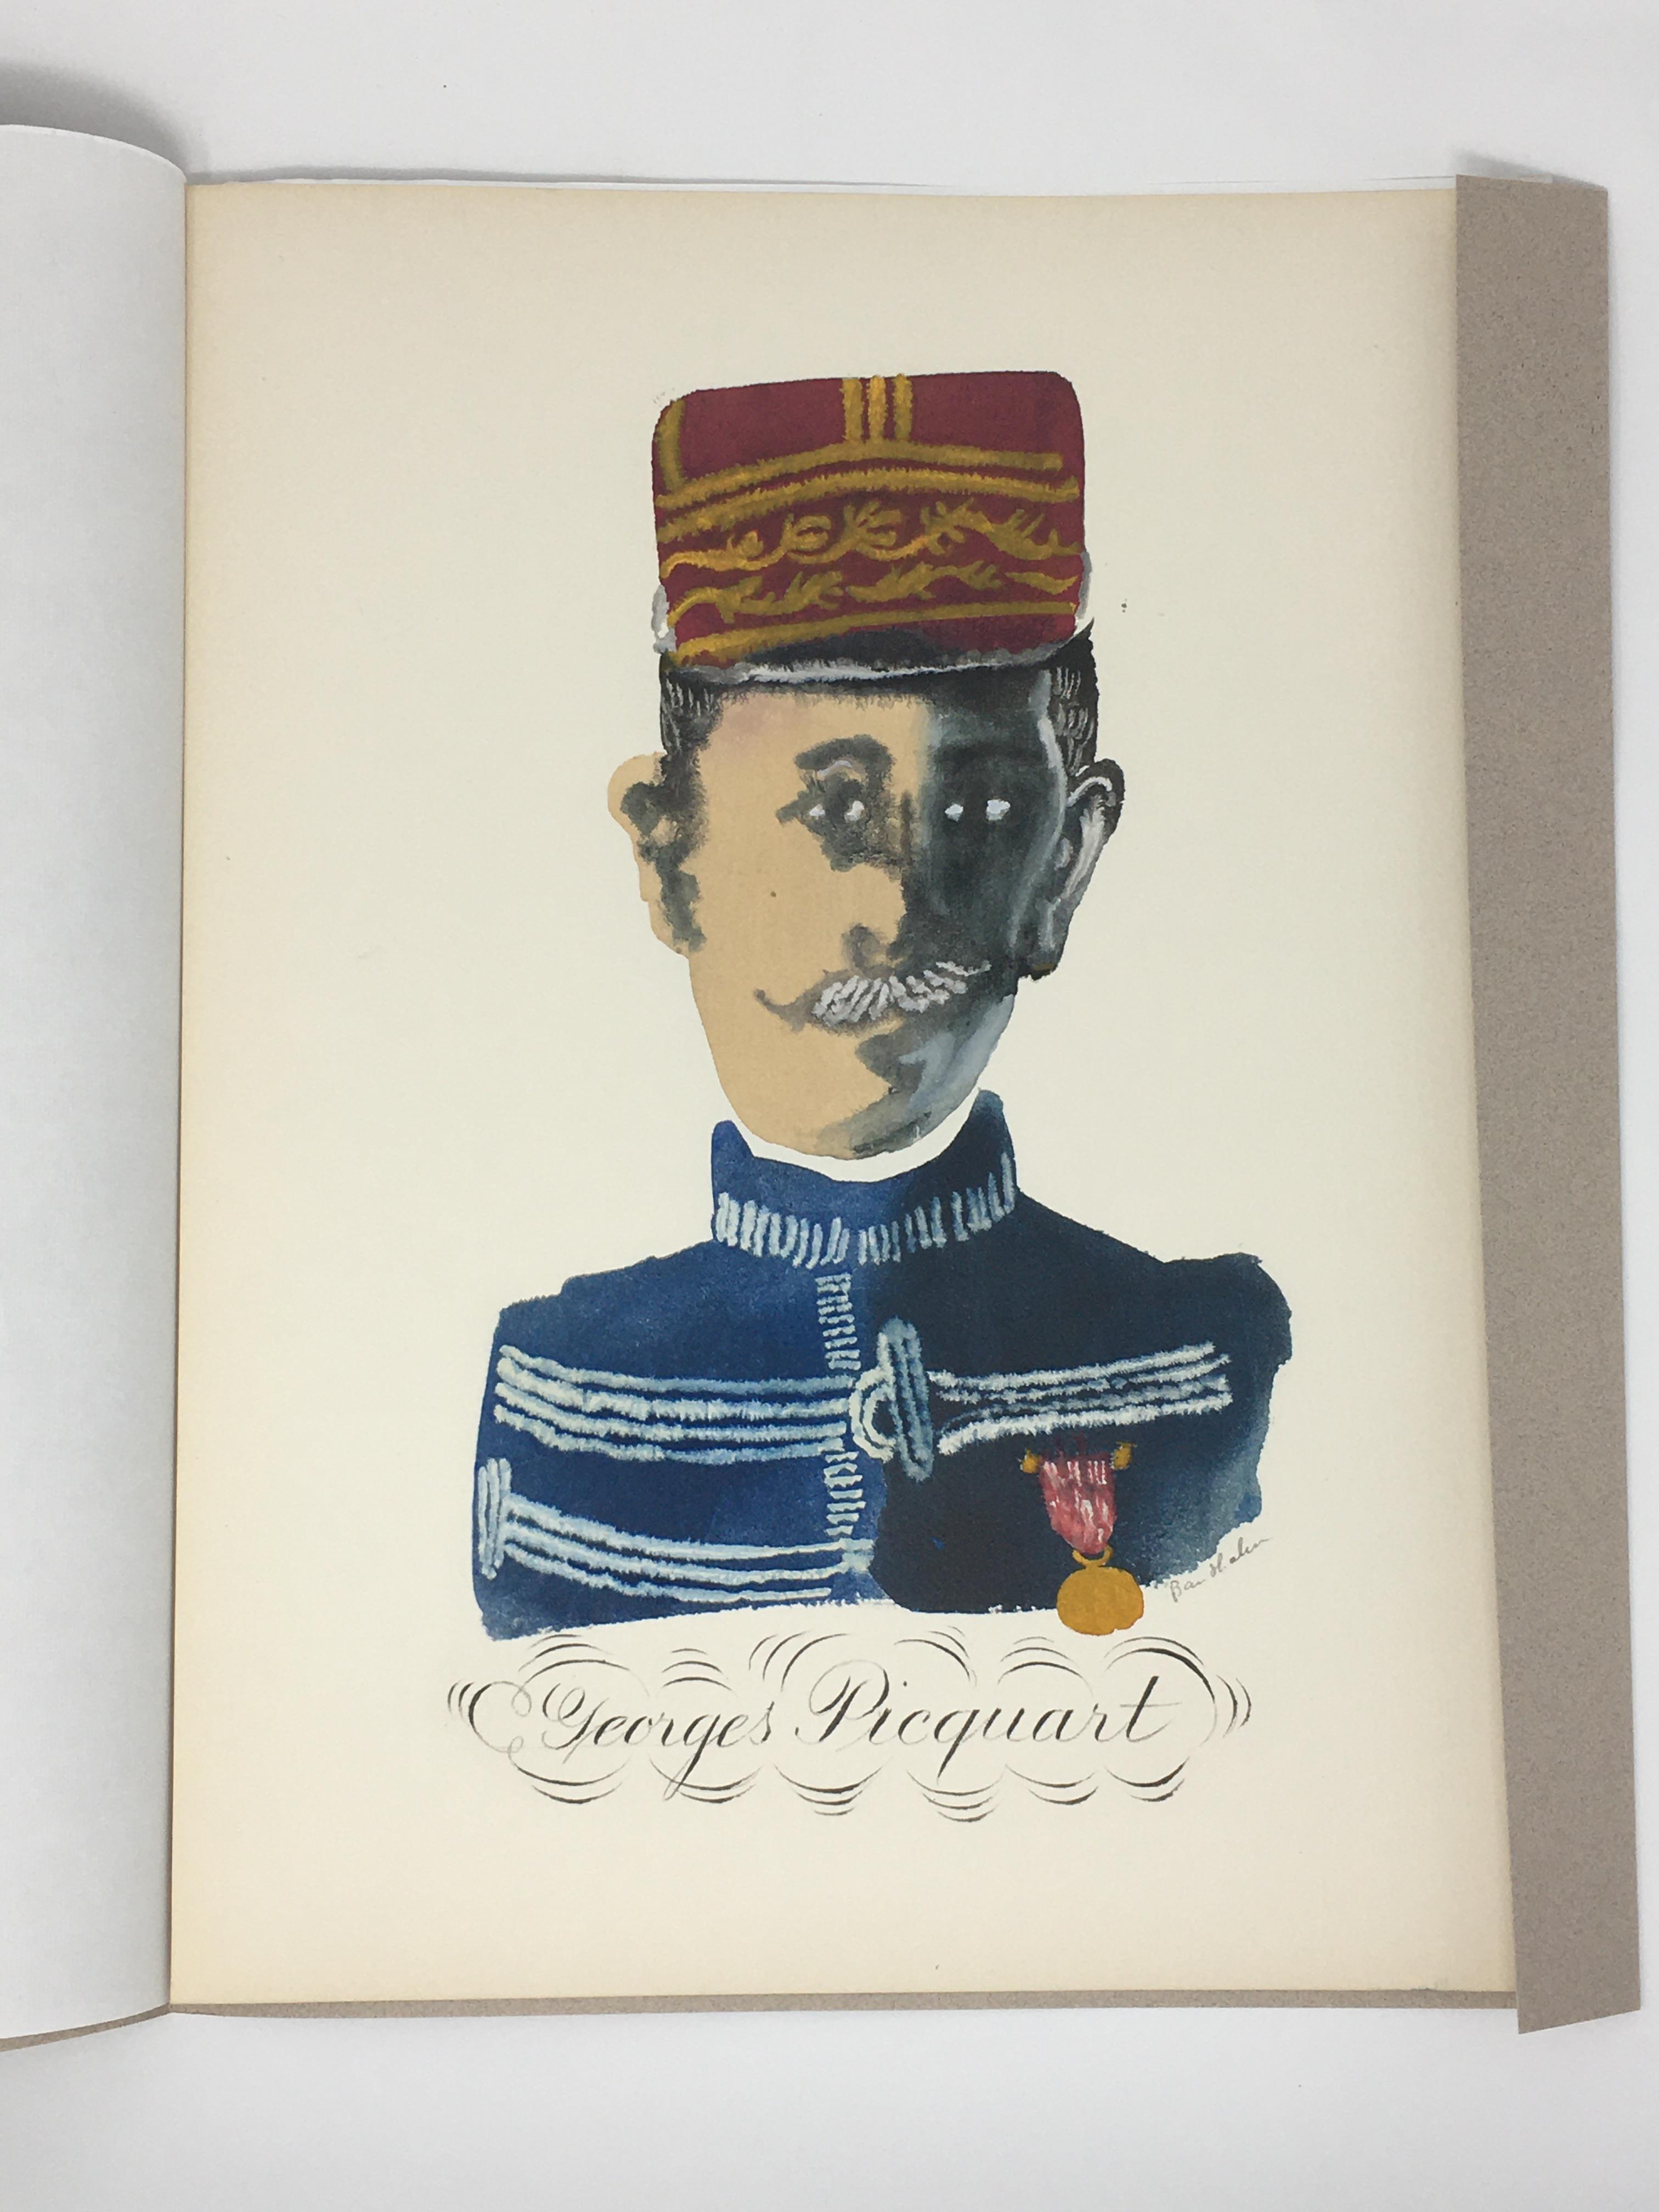 Dreyfus Affair - Book Collection featuring The Ben Shahn Prints (Limited First Edition) - Image 23 of 73